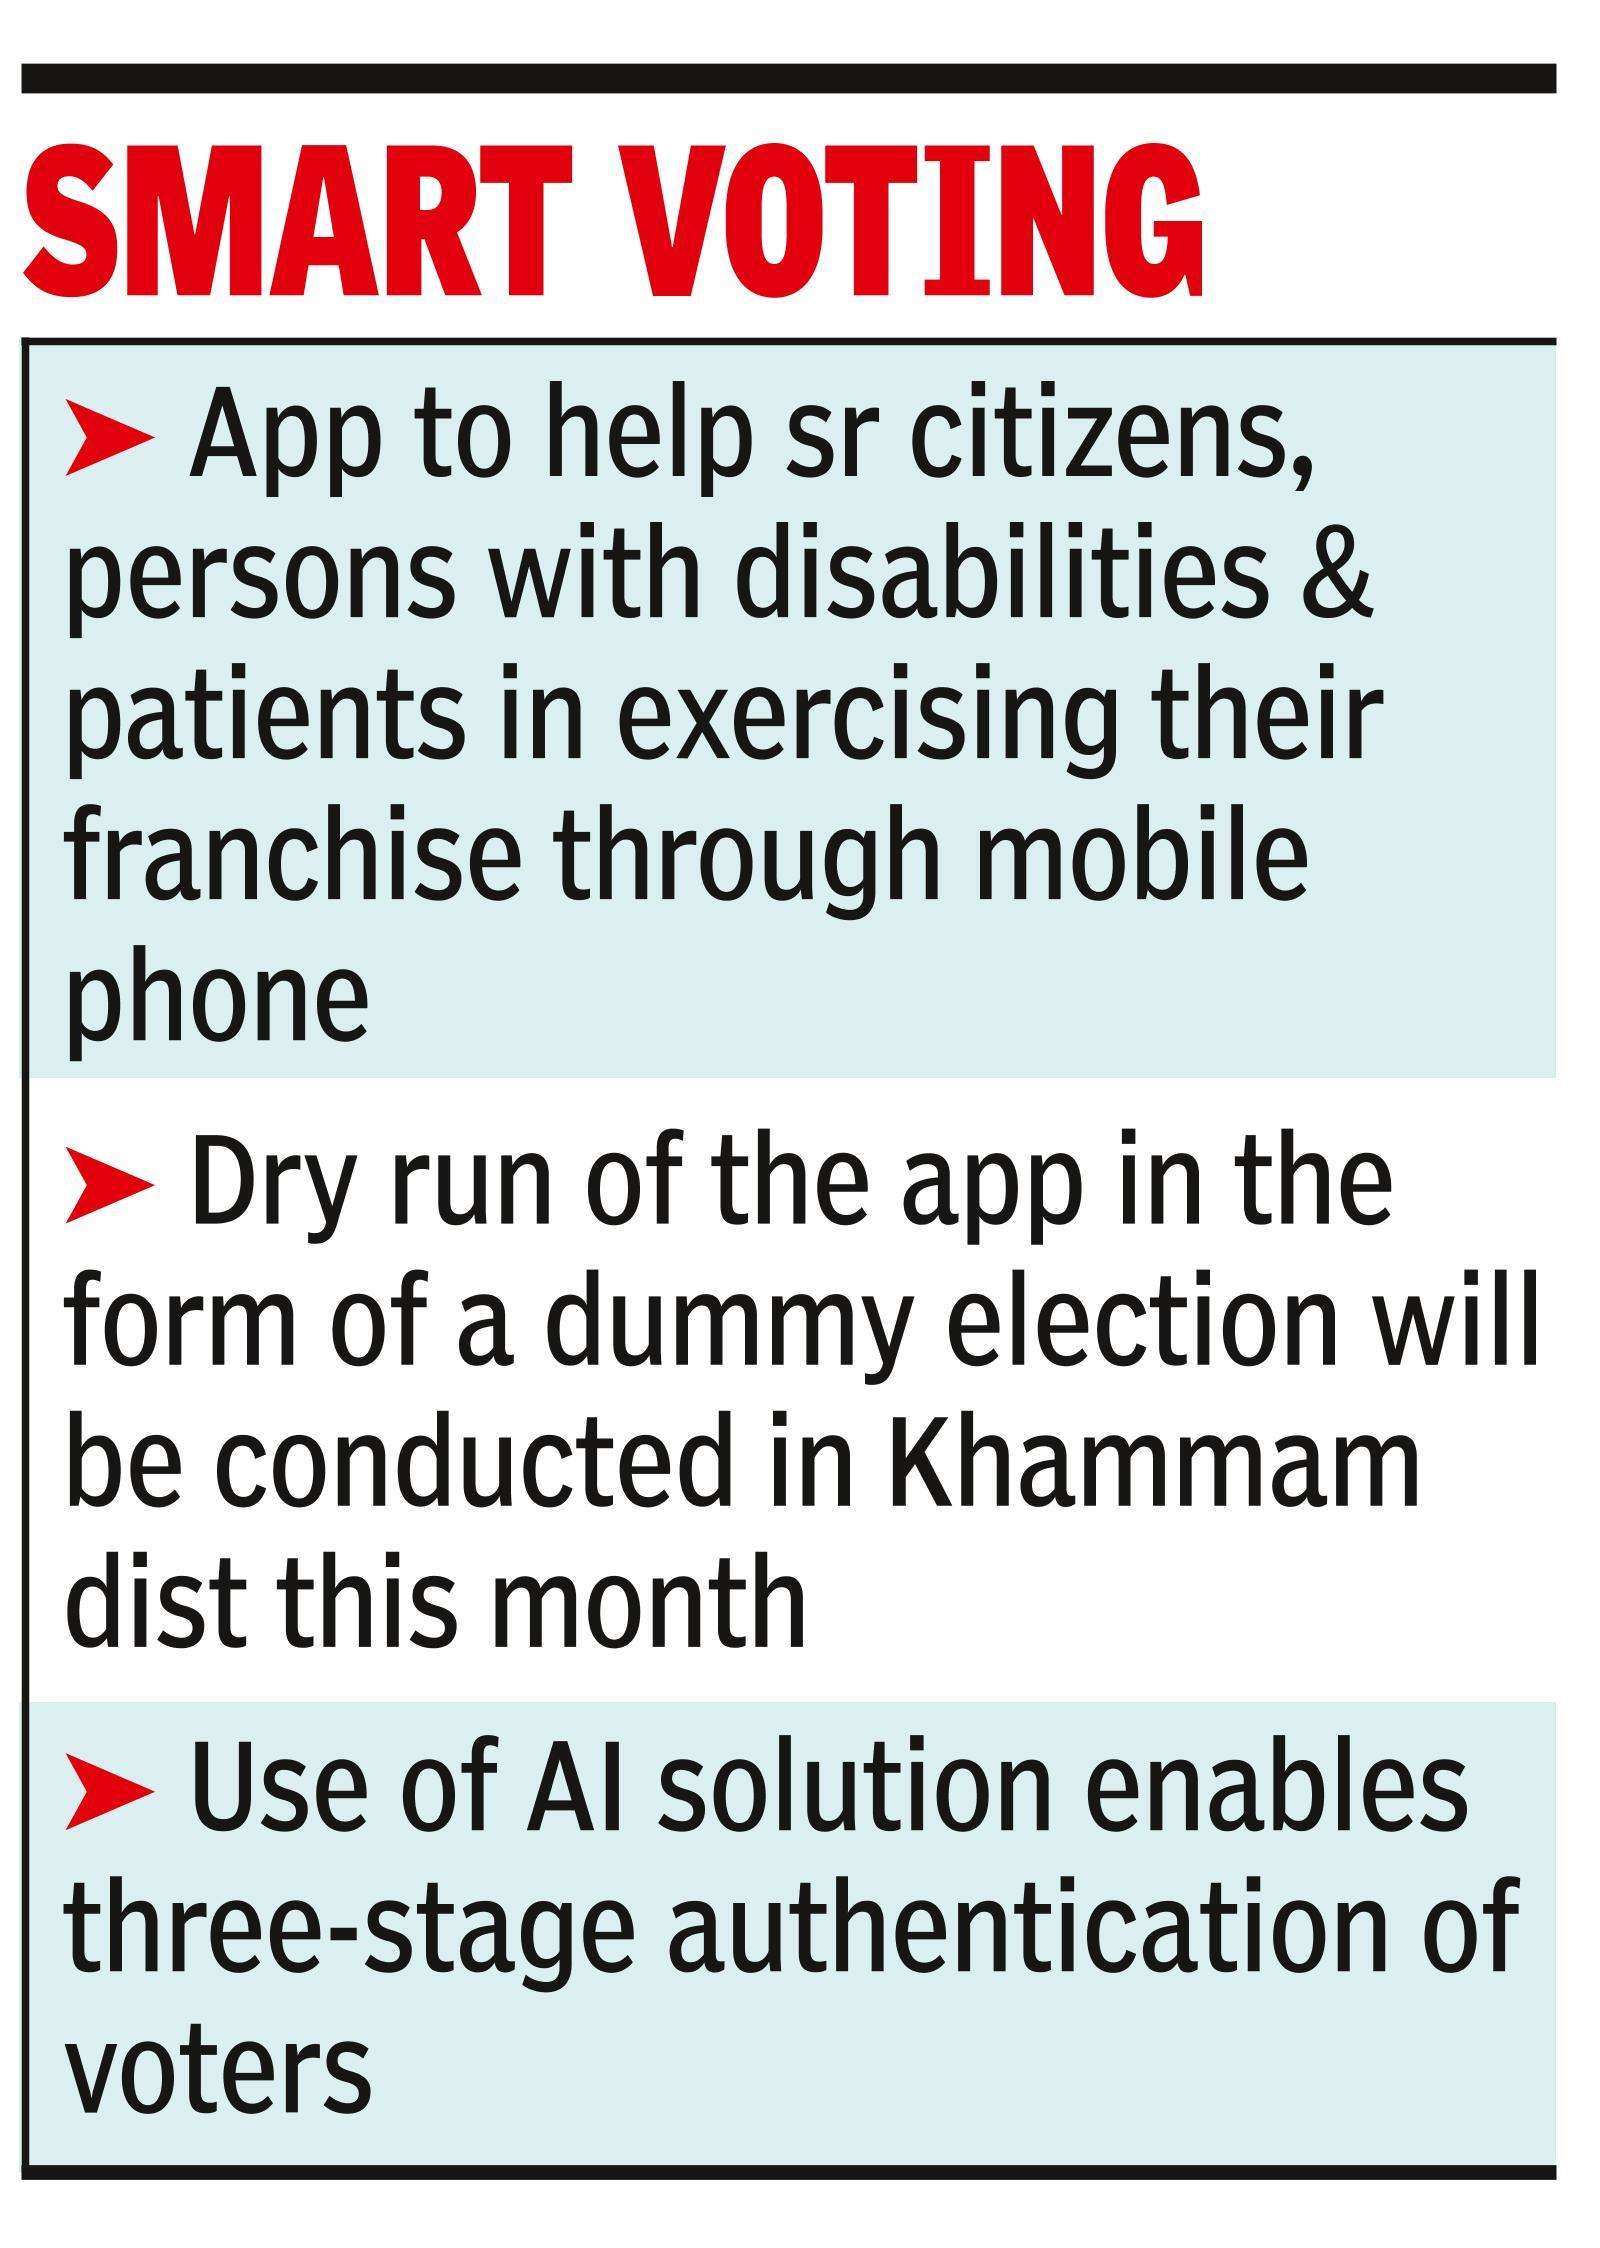 First in India, Telangana develops smartphone-based e-voting app